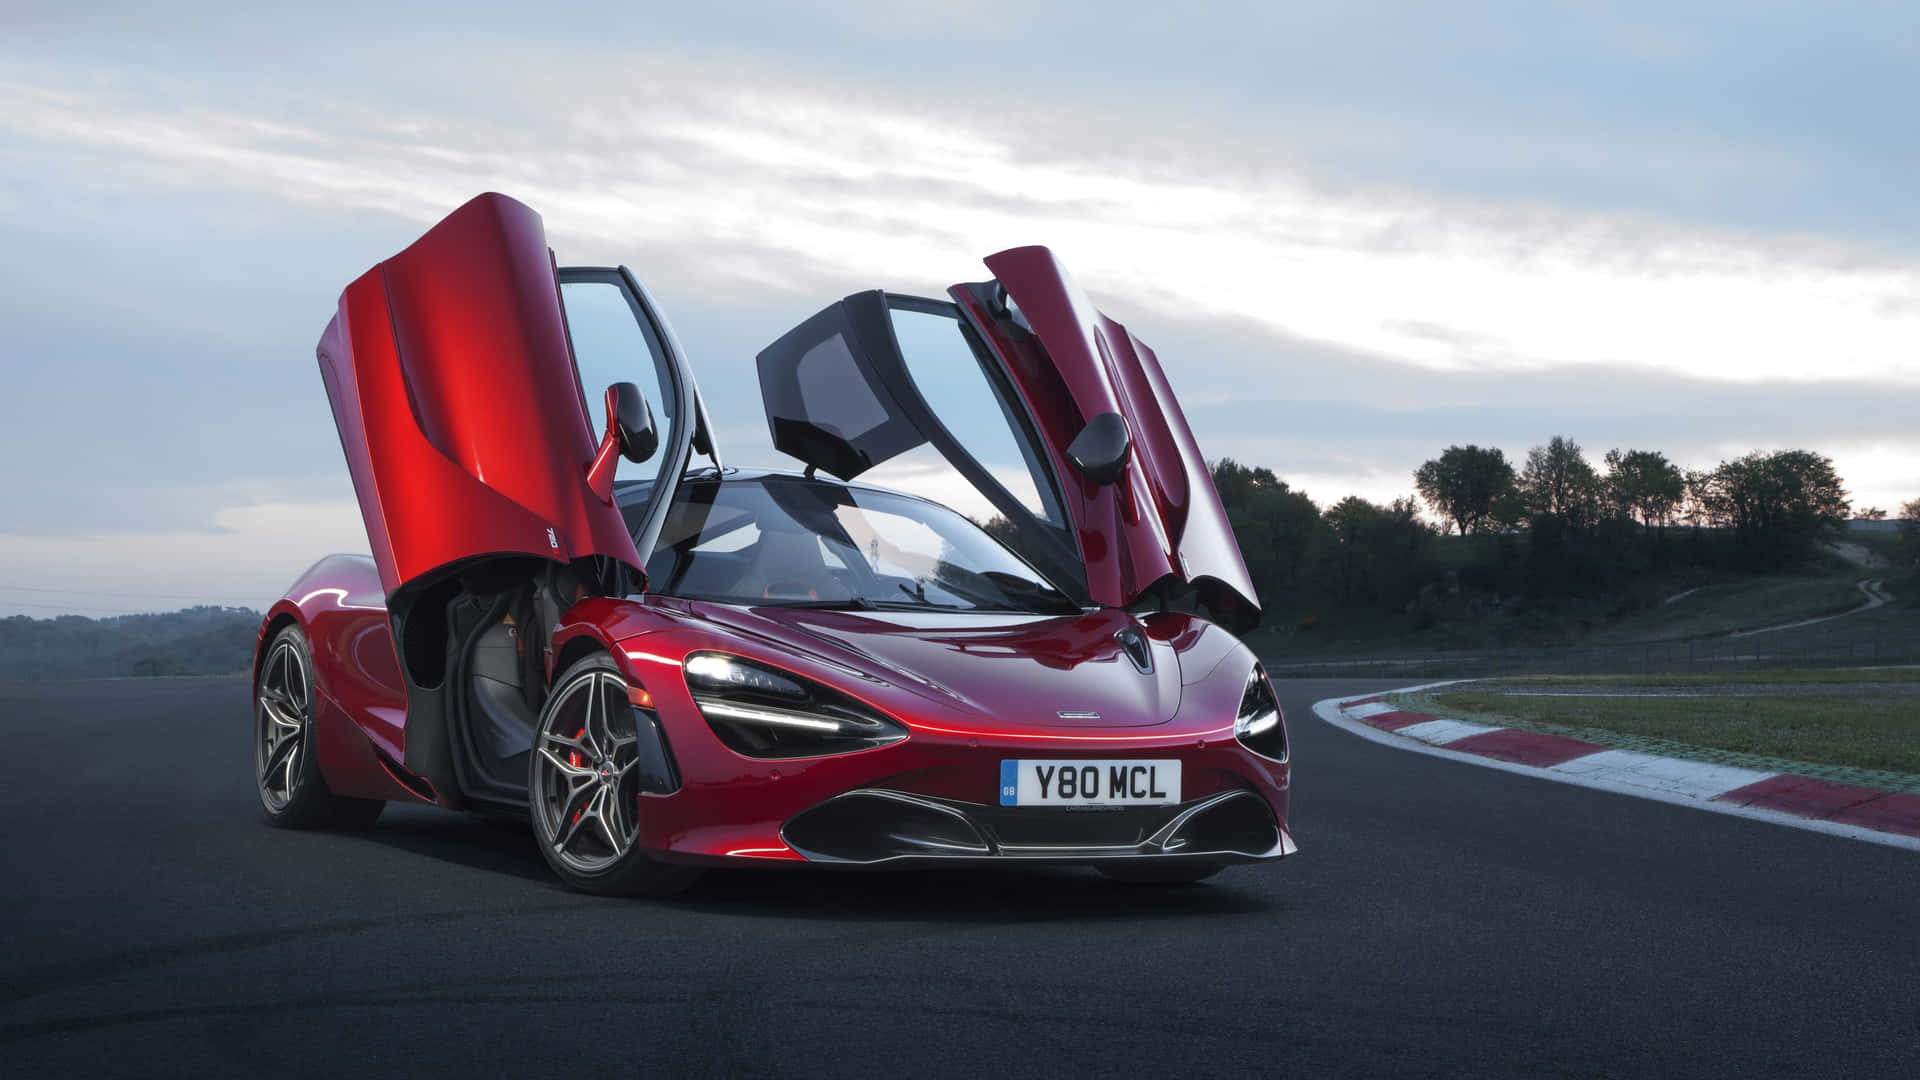 Enjoy the exhilaration of driving the All-New McLaren 720S